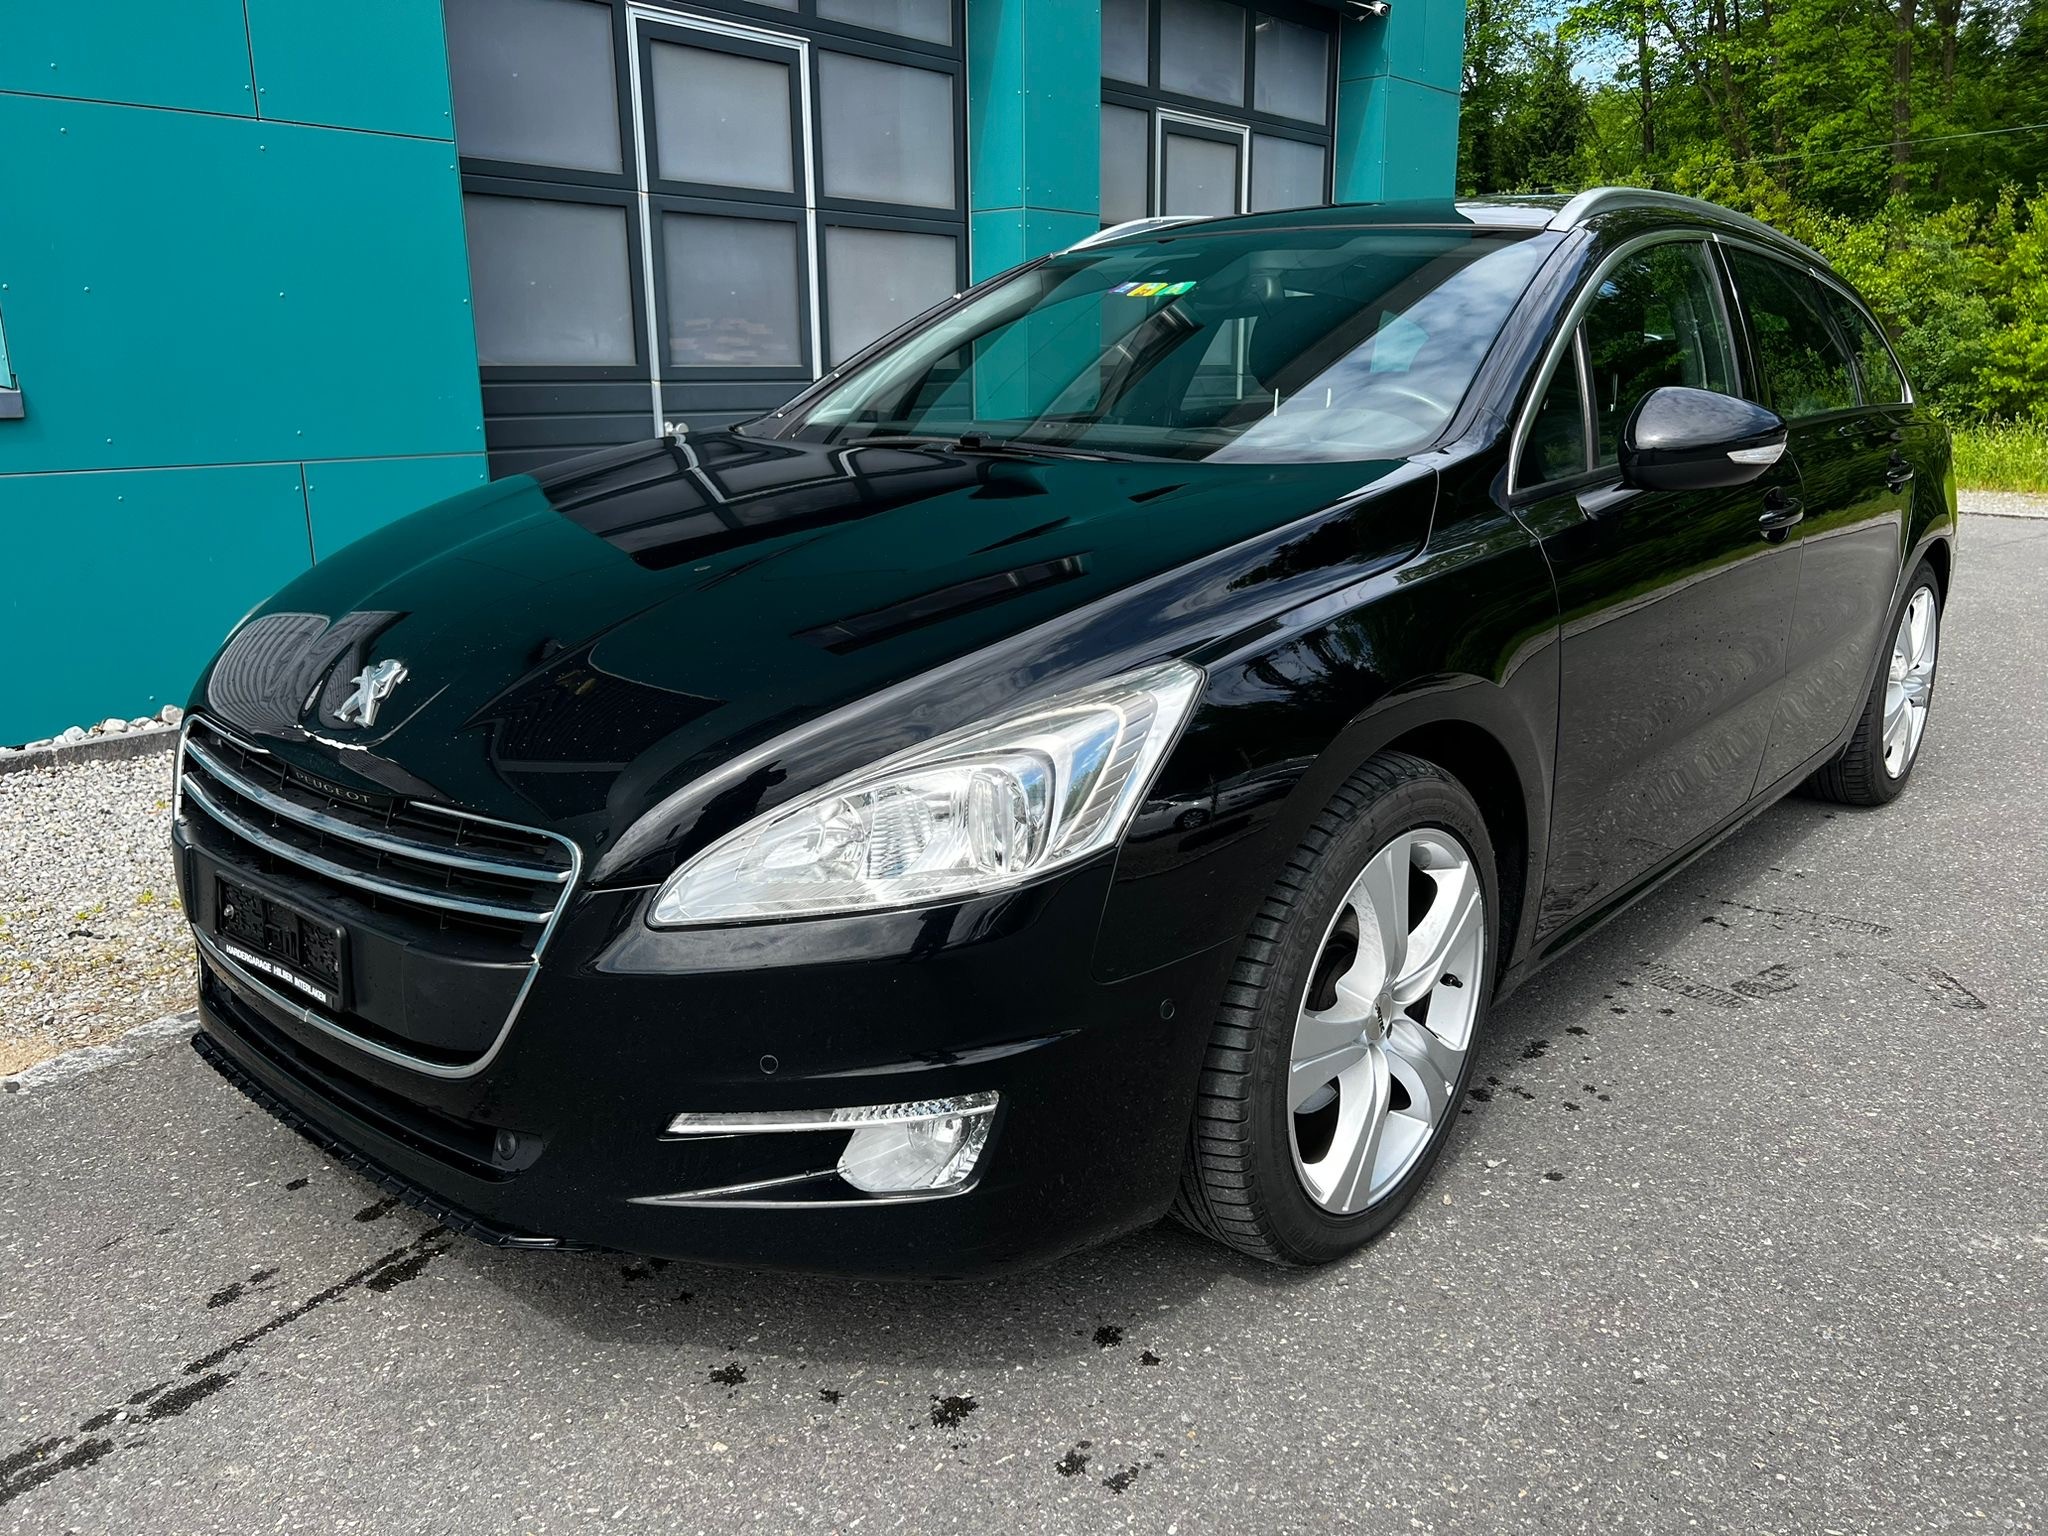 PEUGEOT 508 SW 2.0 HDI Active